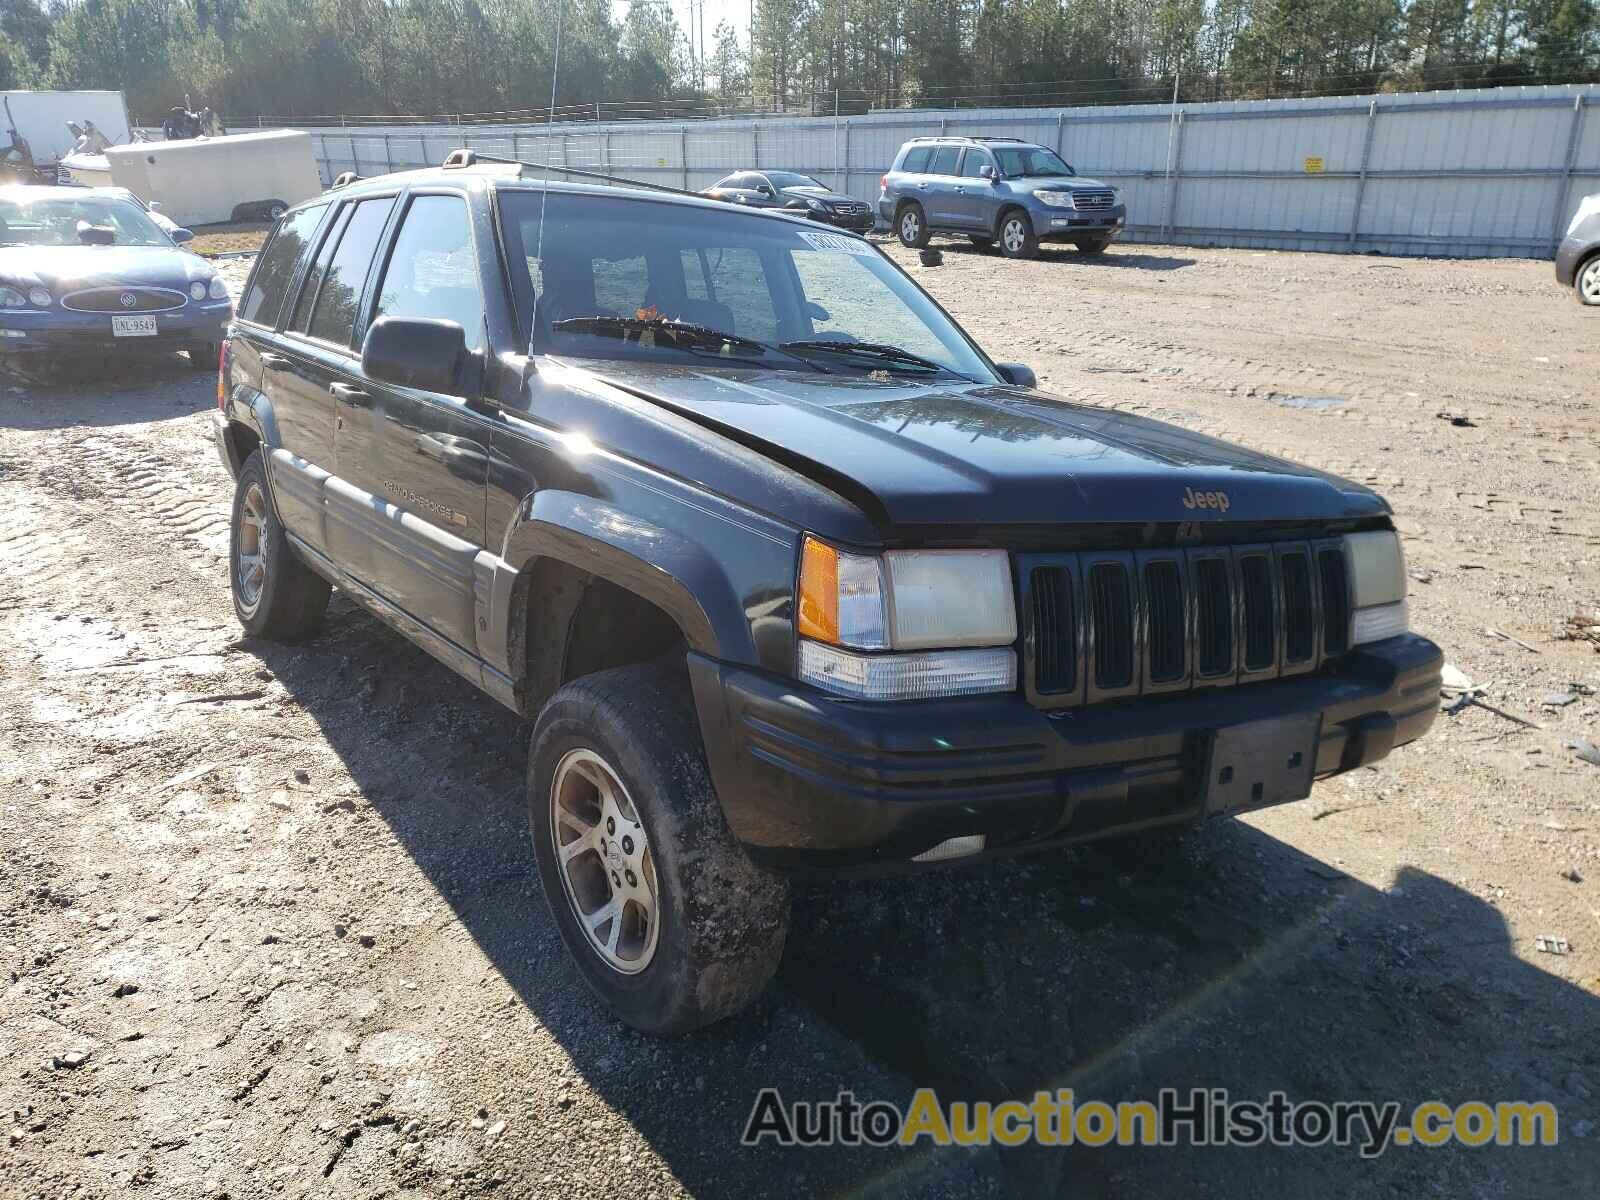 1997 JEEP CHEROKEE LIMITED, 1J4GZ78Y4VC501870